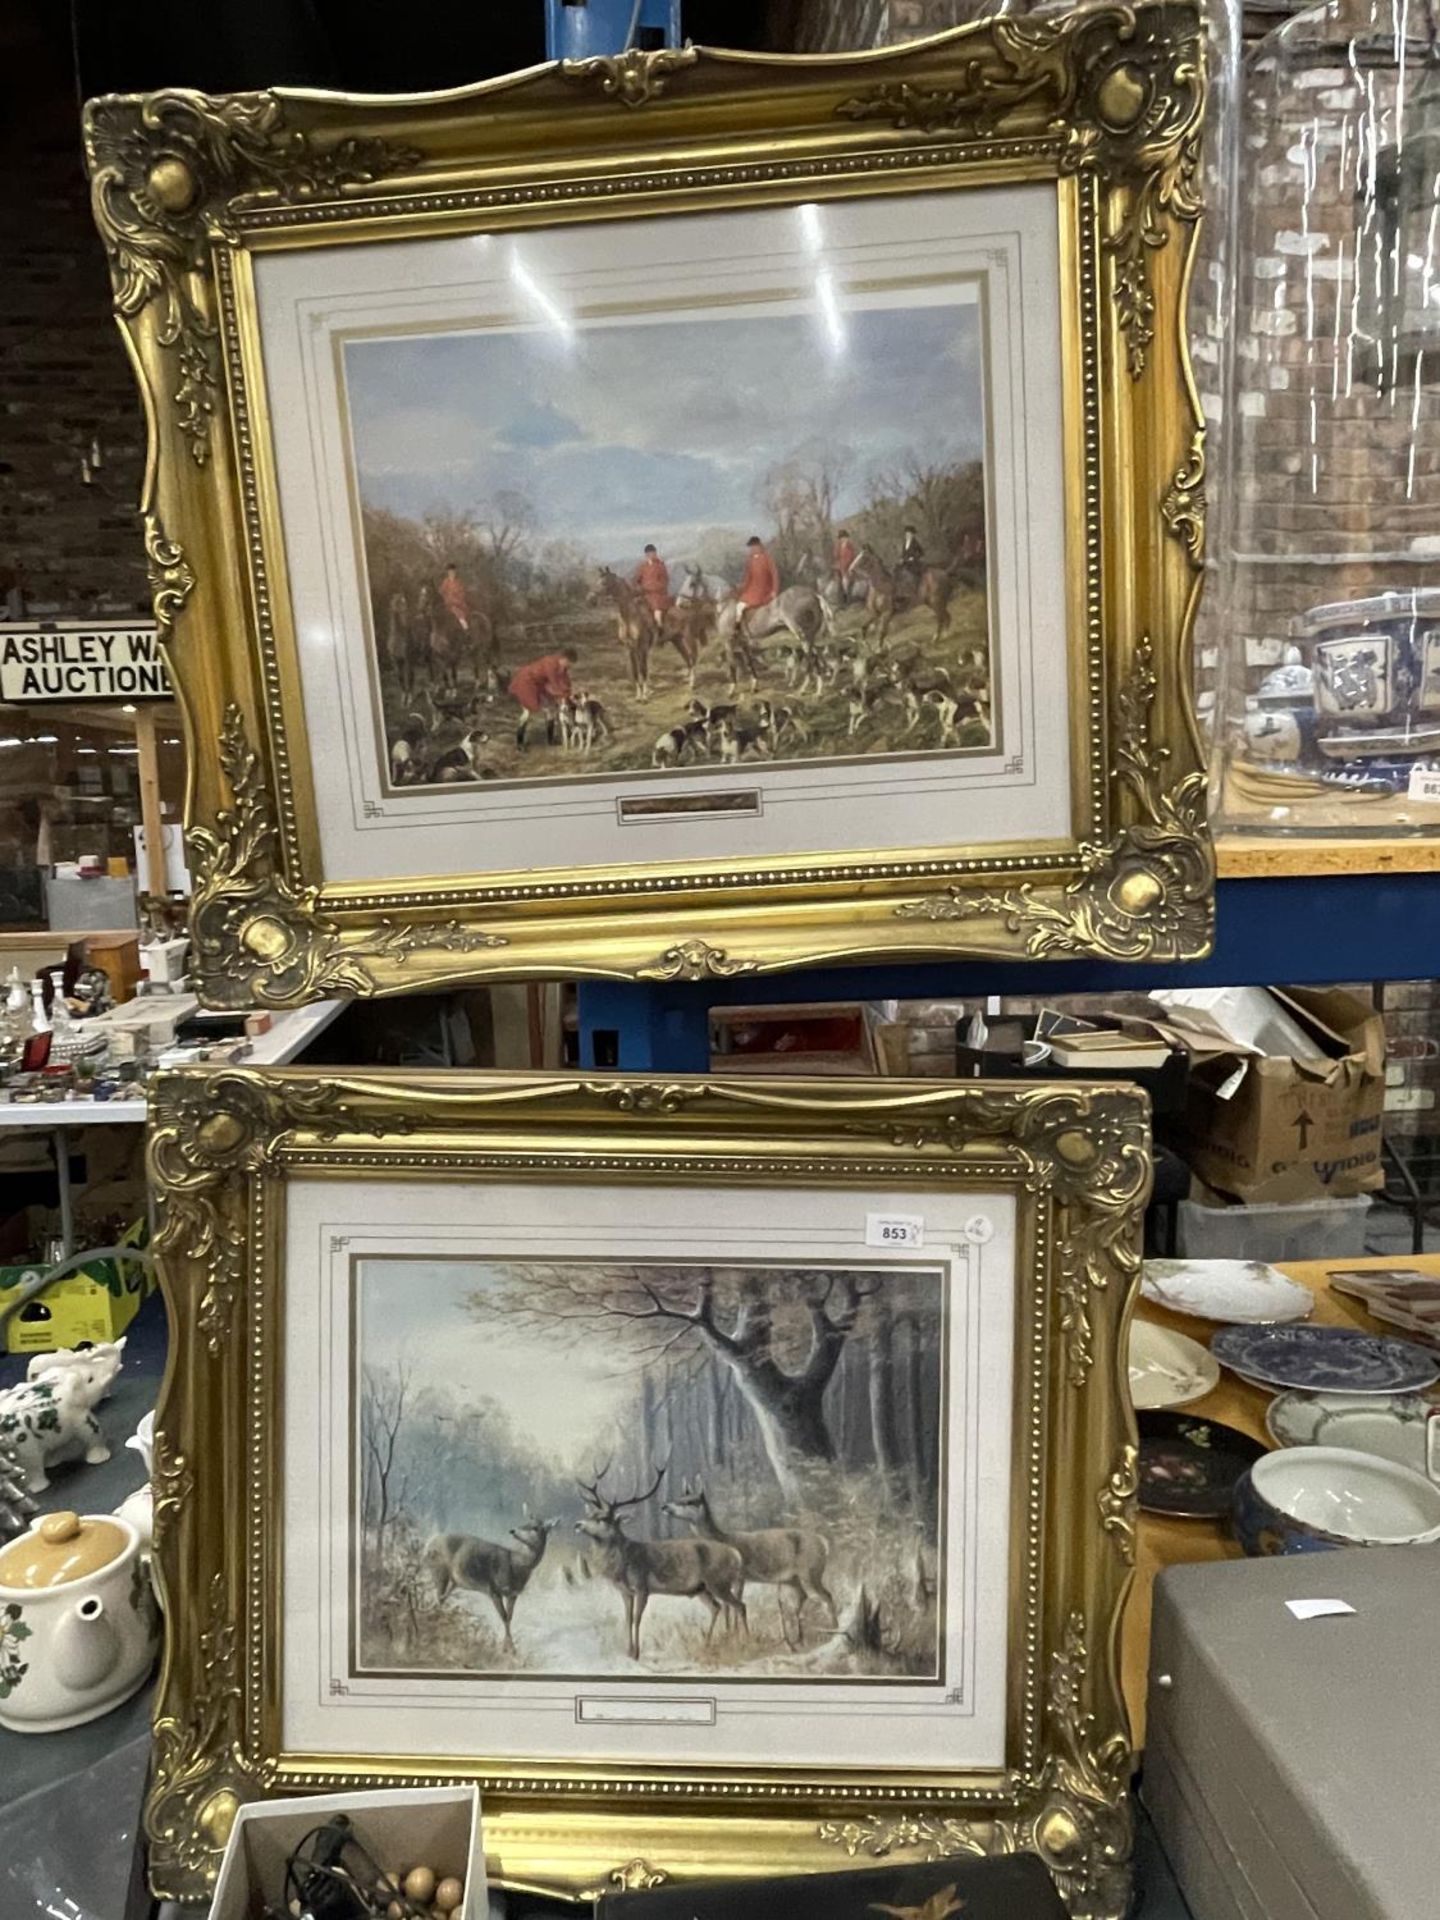 TWO GILT FRAMED PRINTS ONE OF DEER IN A WOODLAND SETTING, THE OTHER A HUNTING SCENE